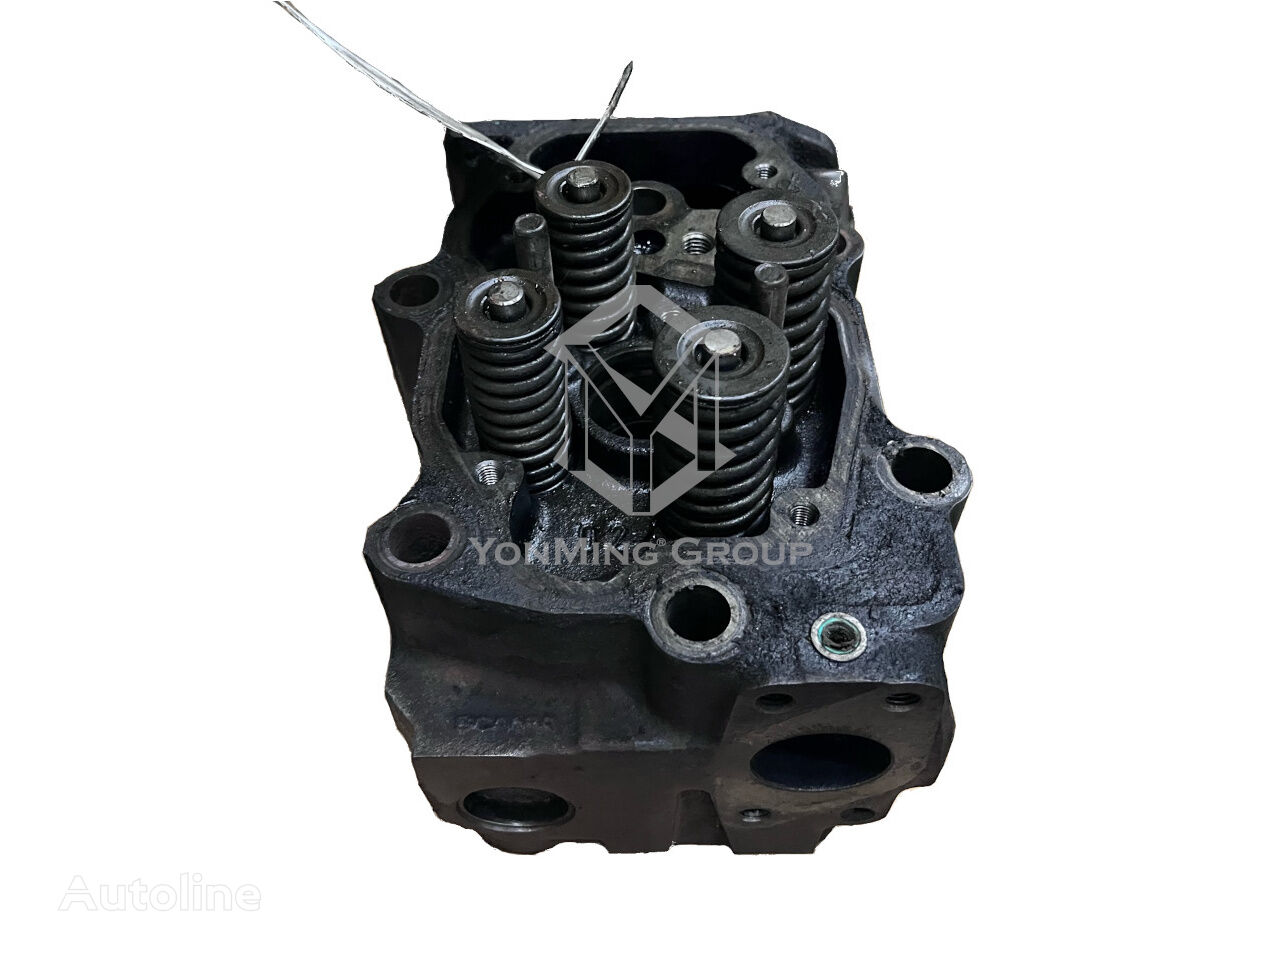 Scania 1450057 cylinder head for truck